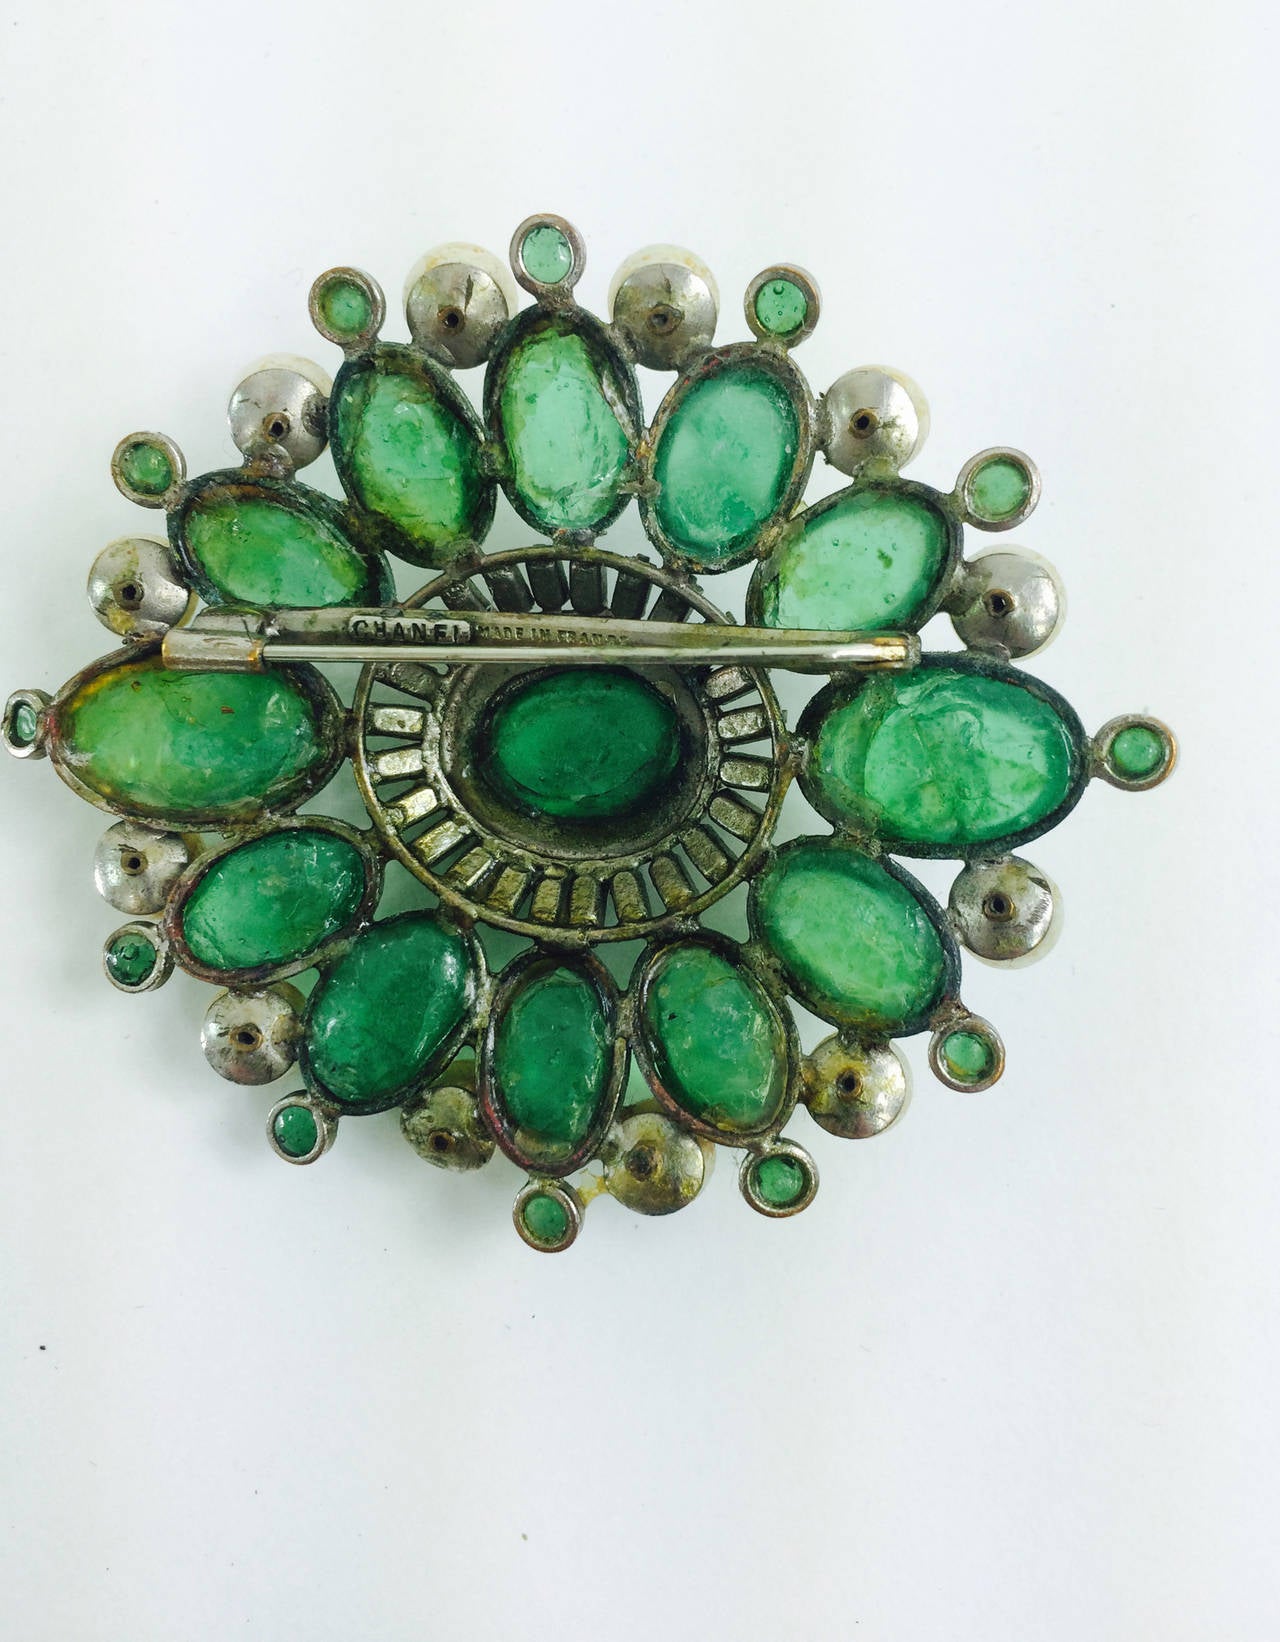 SOLD Chanel Rare Early Signed large Gripoix Emerald Brooch 1950s